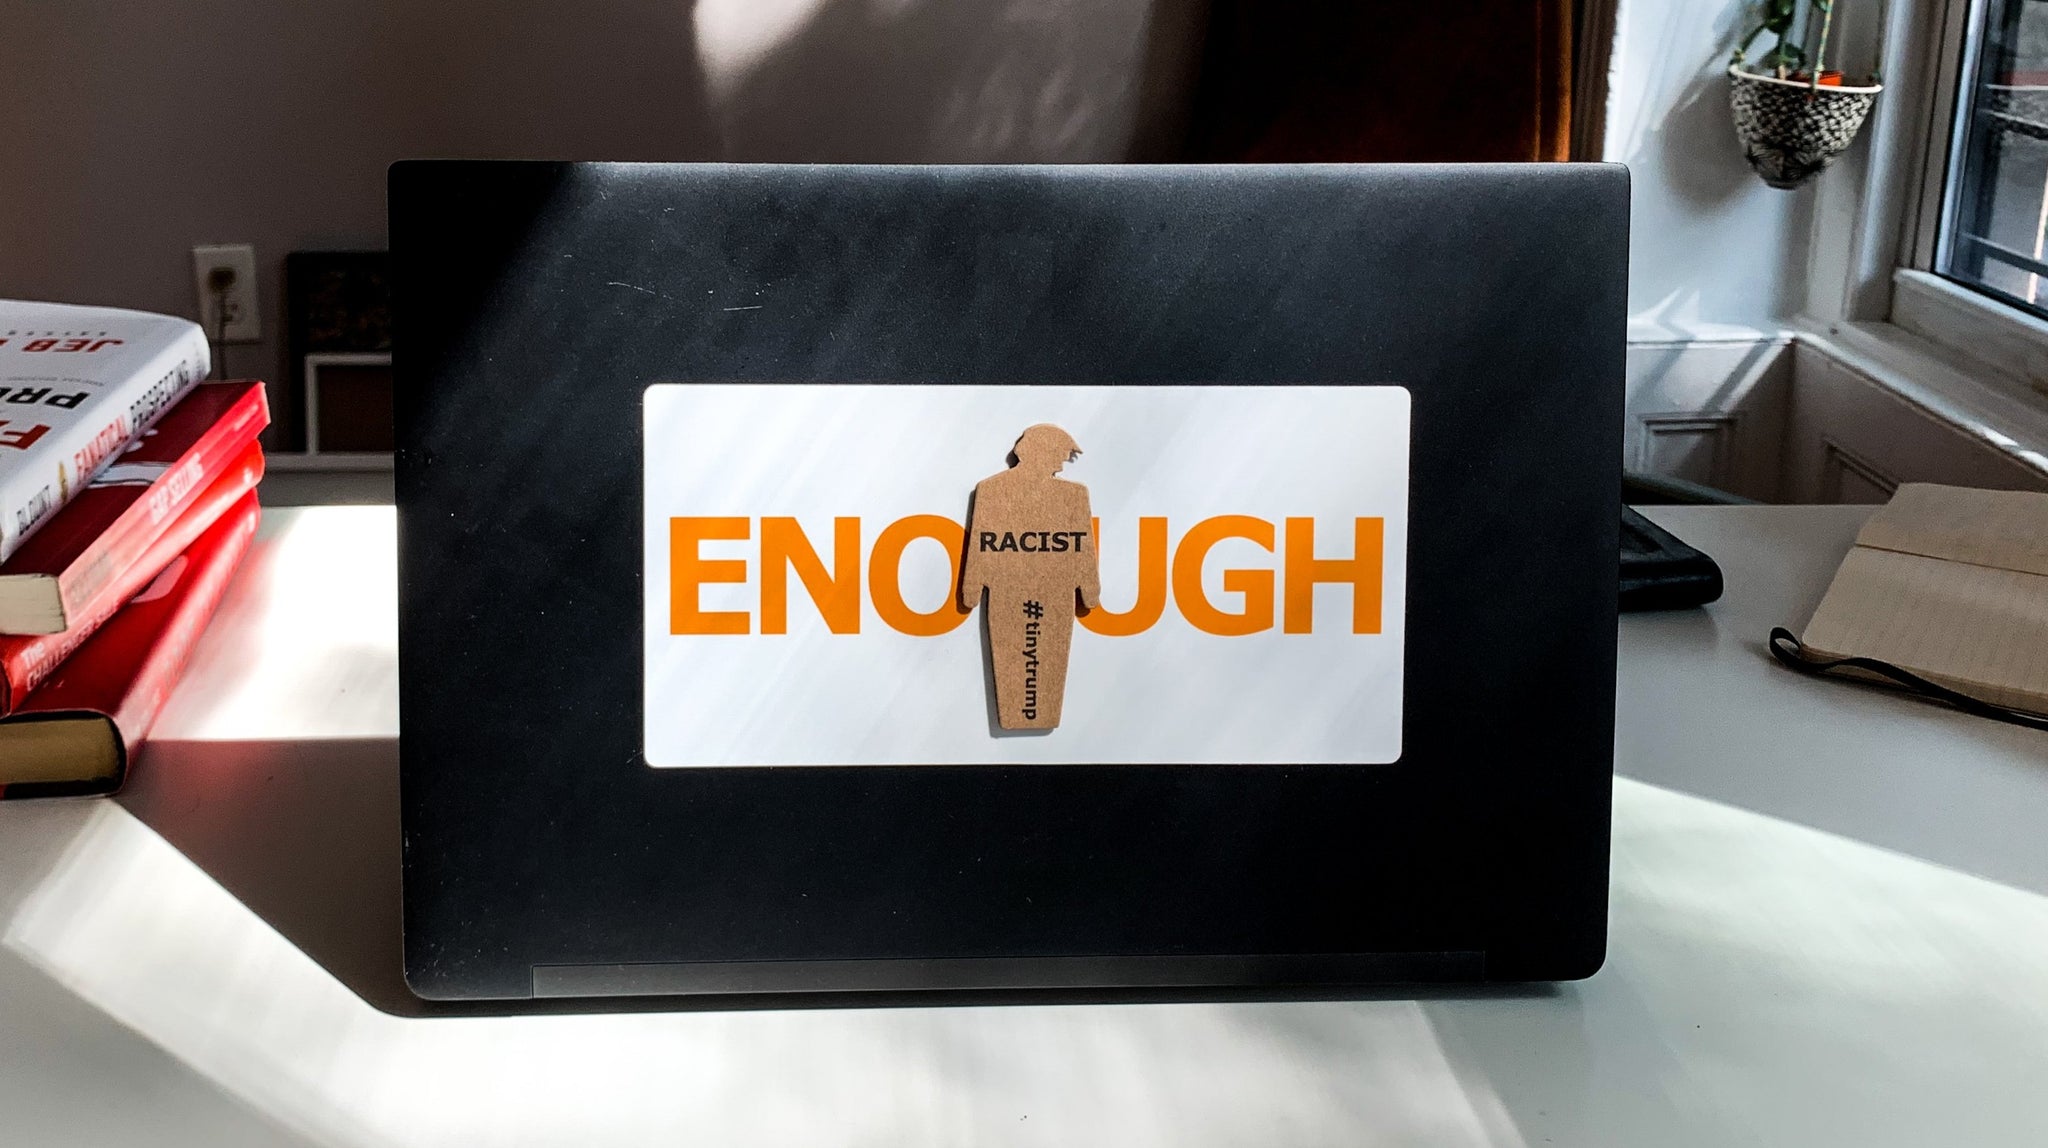 "ENOUGH" tiny trump laptop sticker shown with a "Racist" tiny trump stuck on top